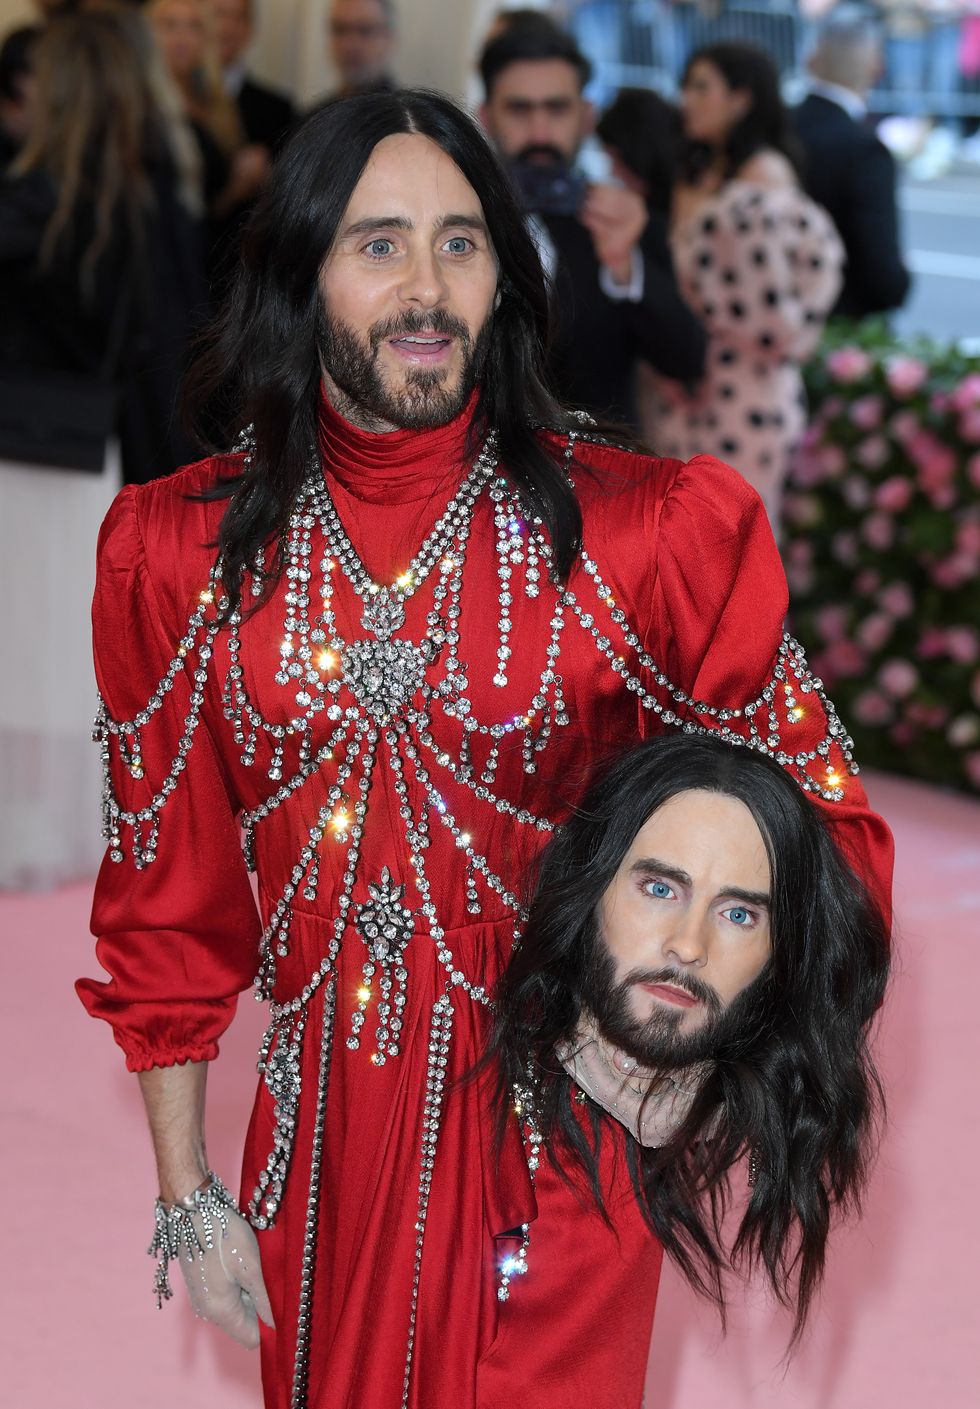 Jared Leto doing the Met Gala Gucci challenge